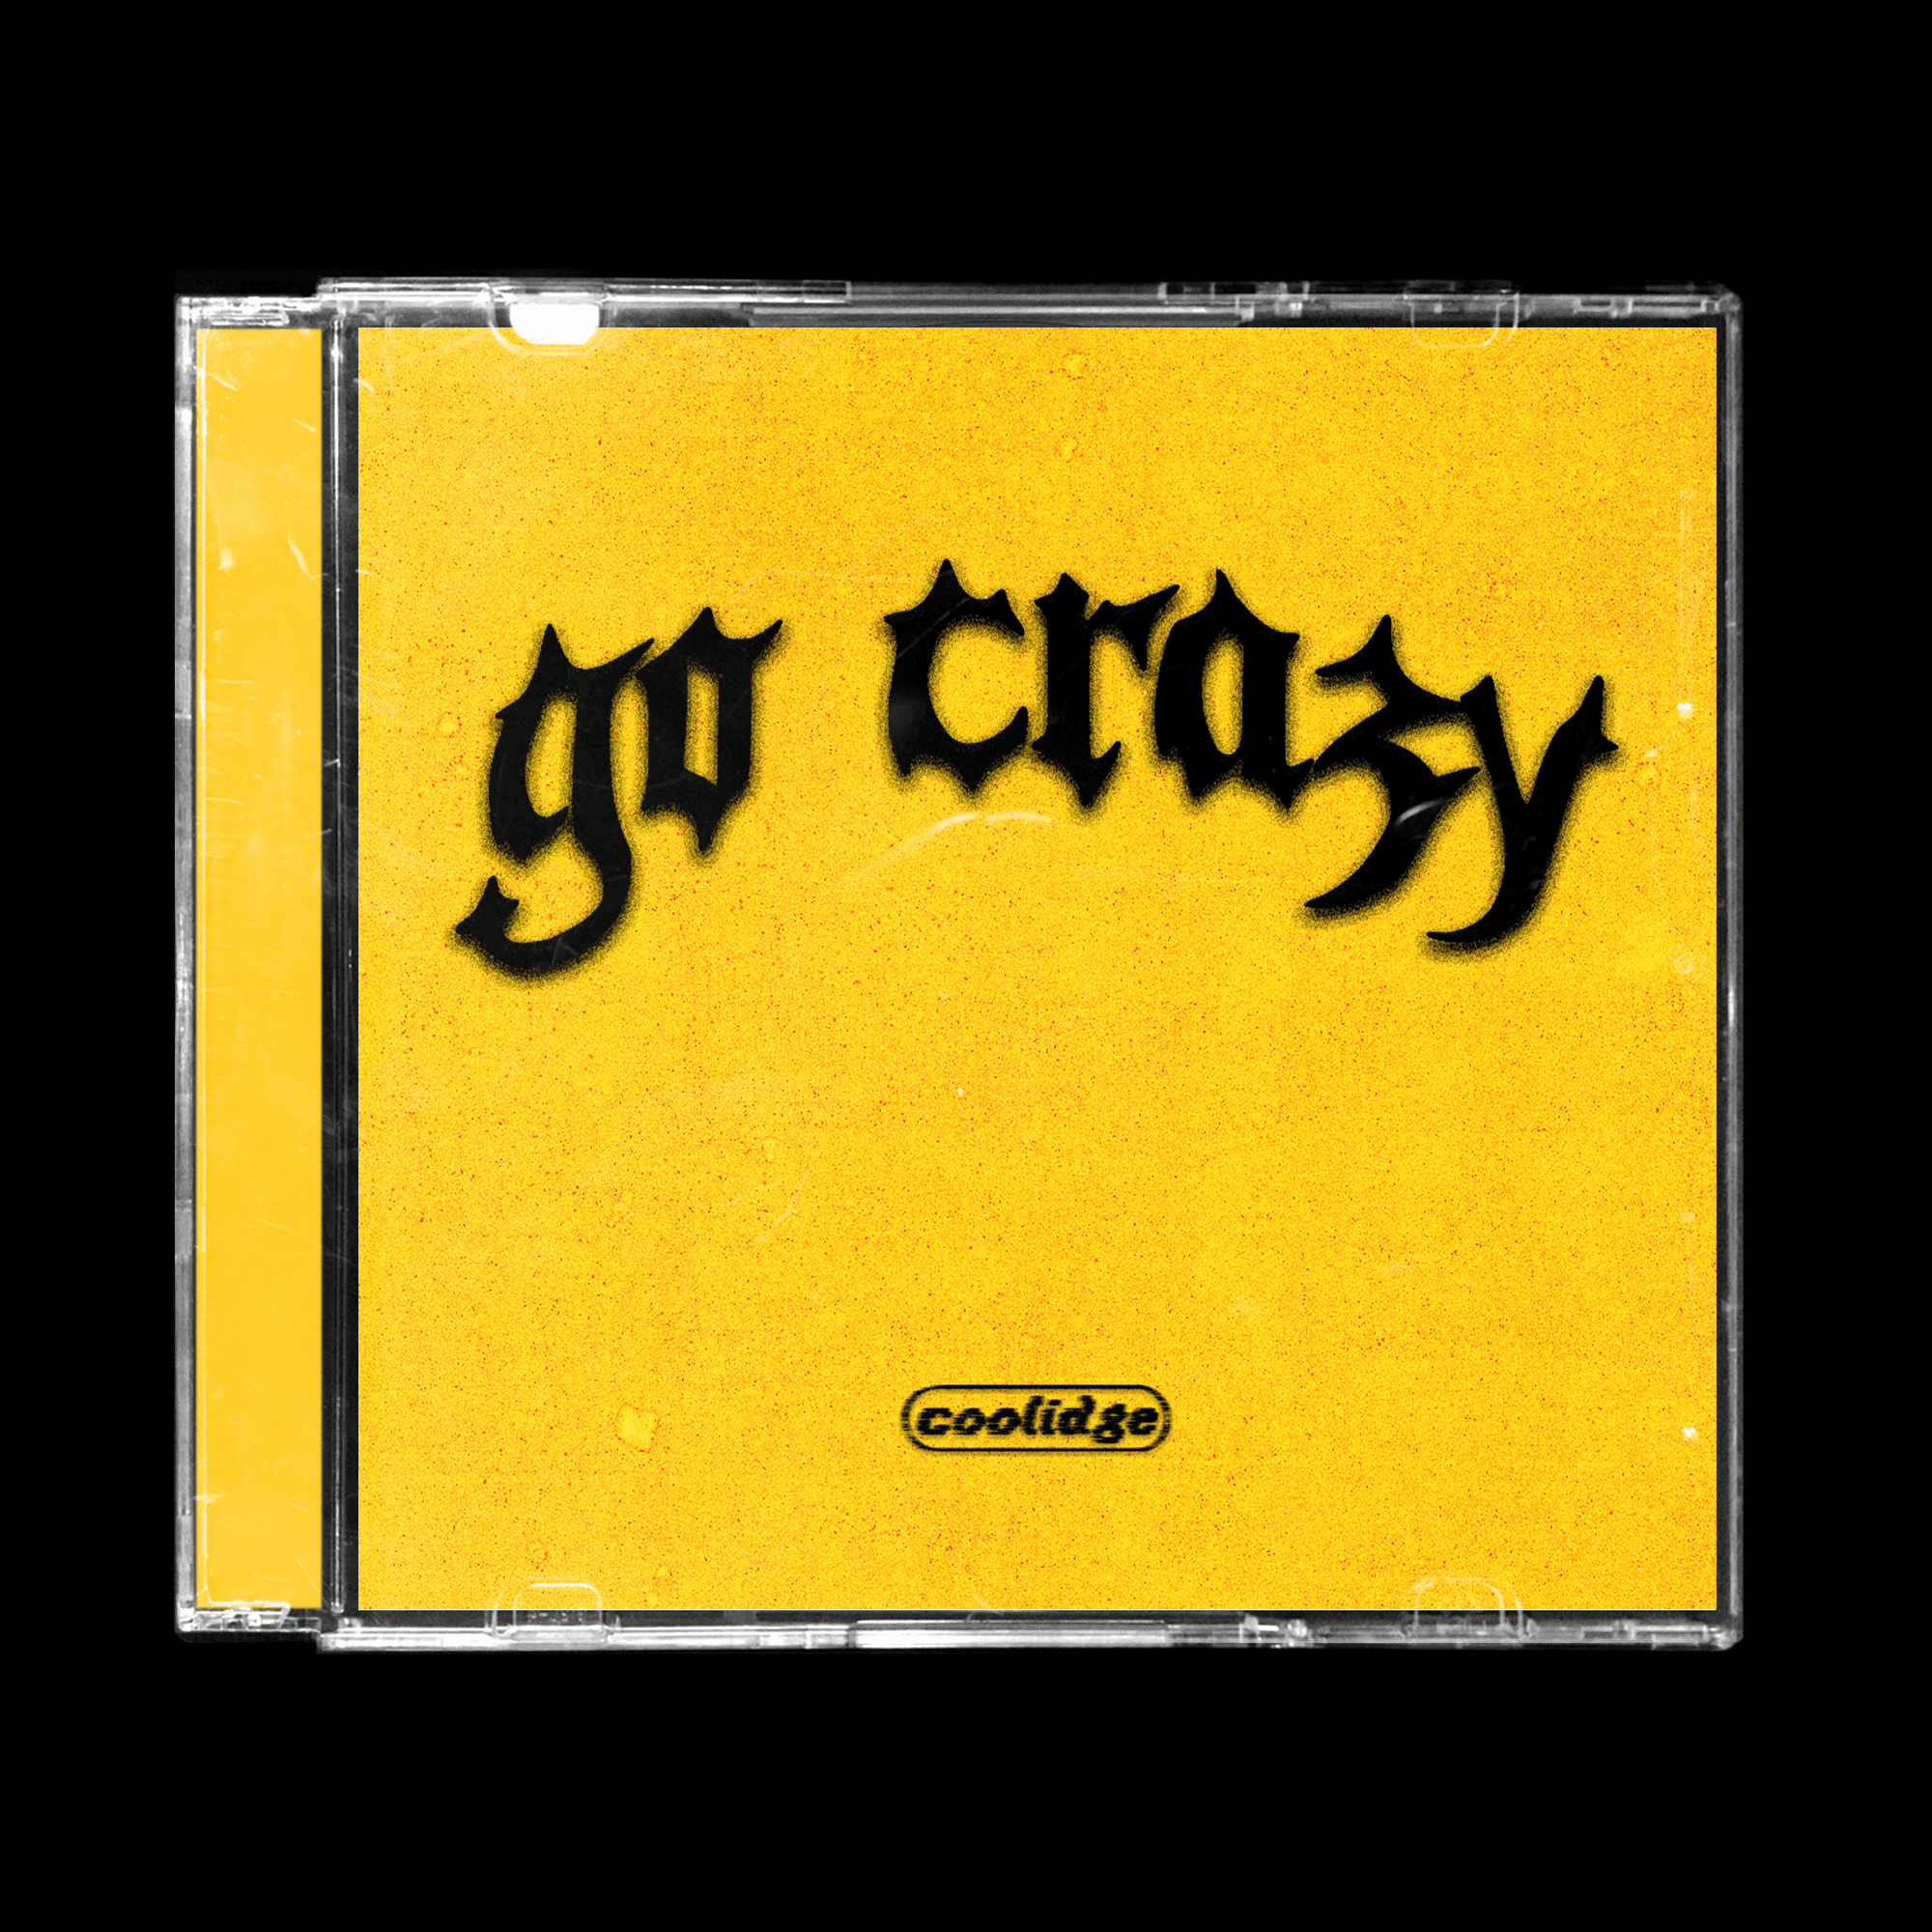 Cover art for GO CRAZY by tyler coolidge